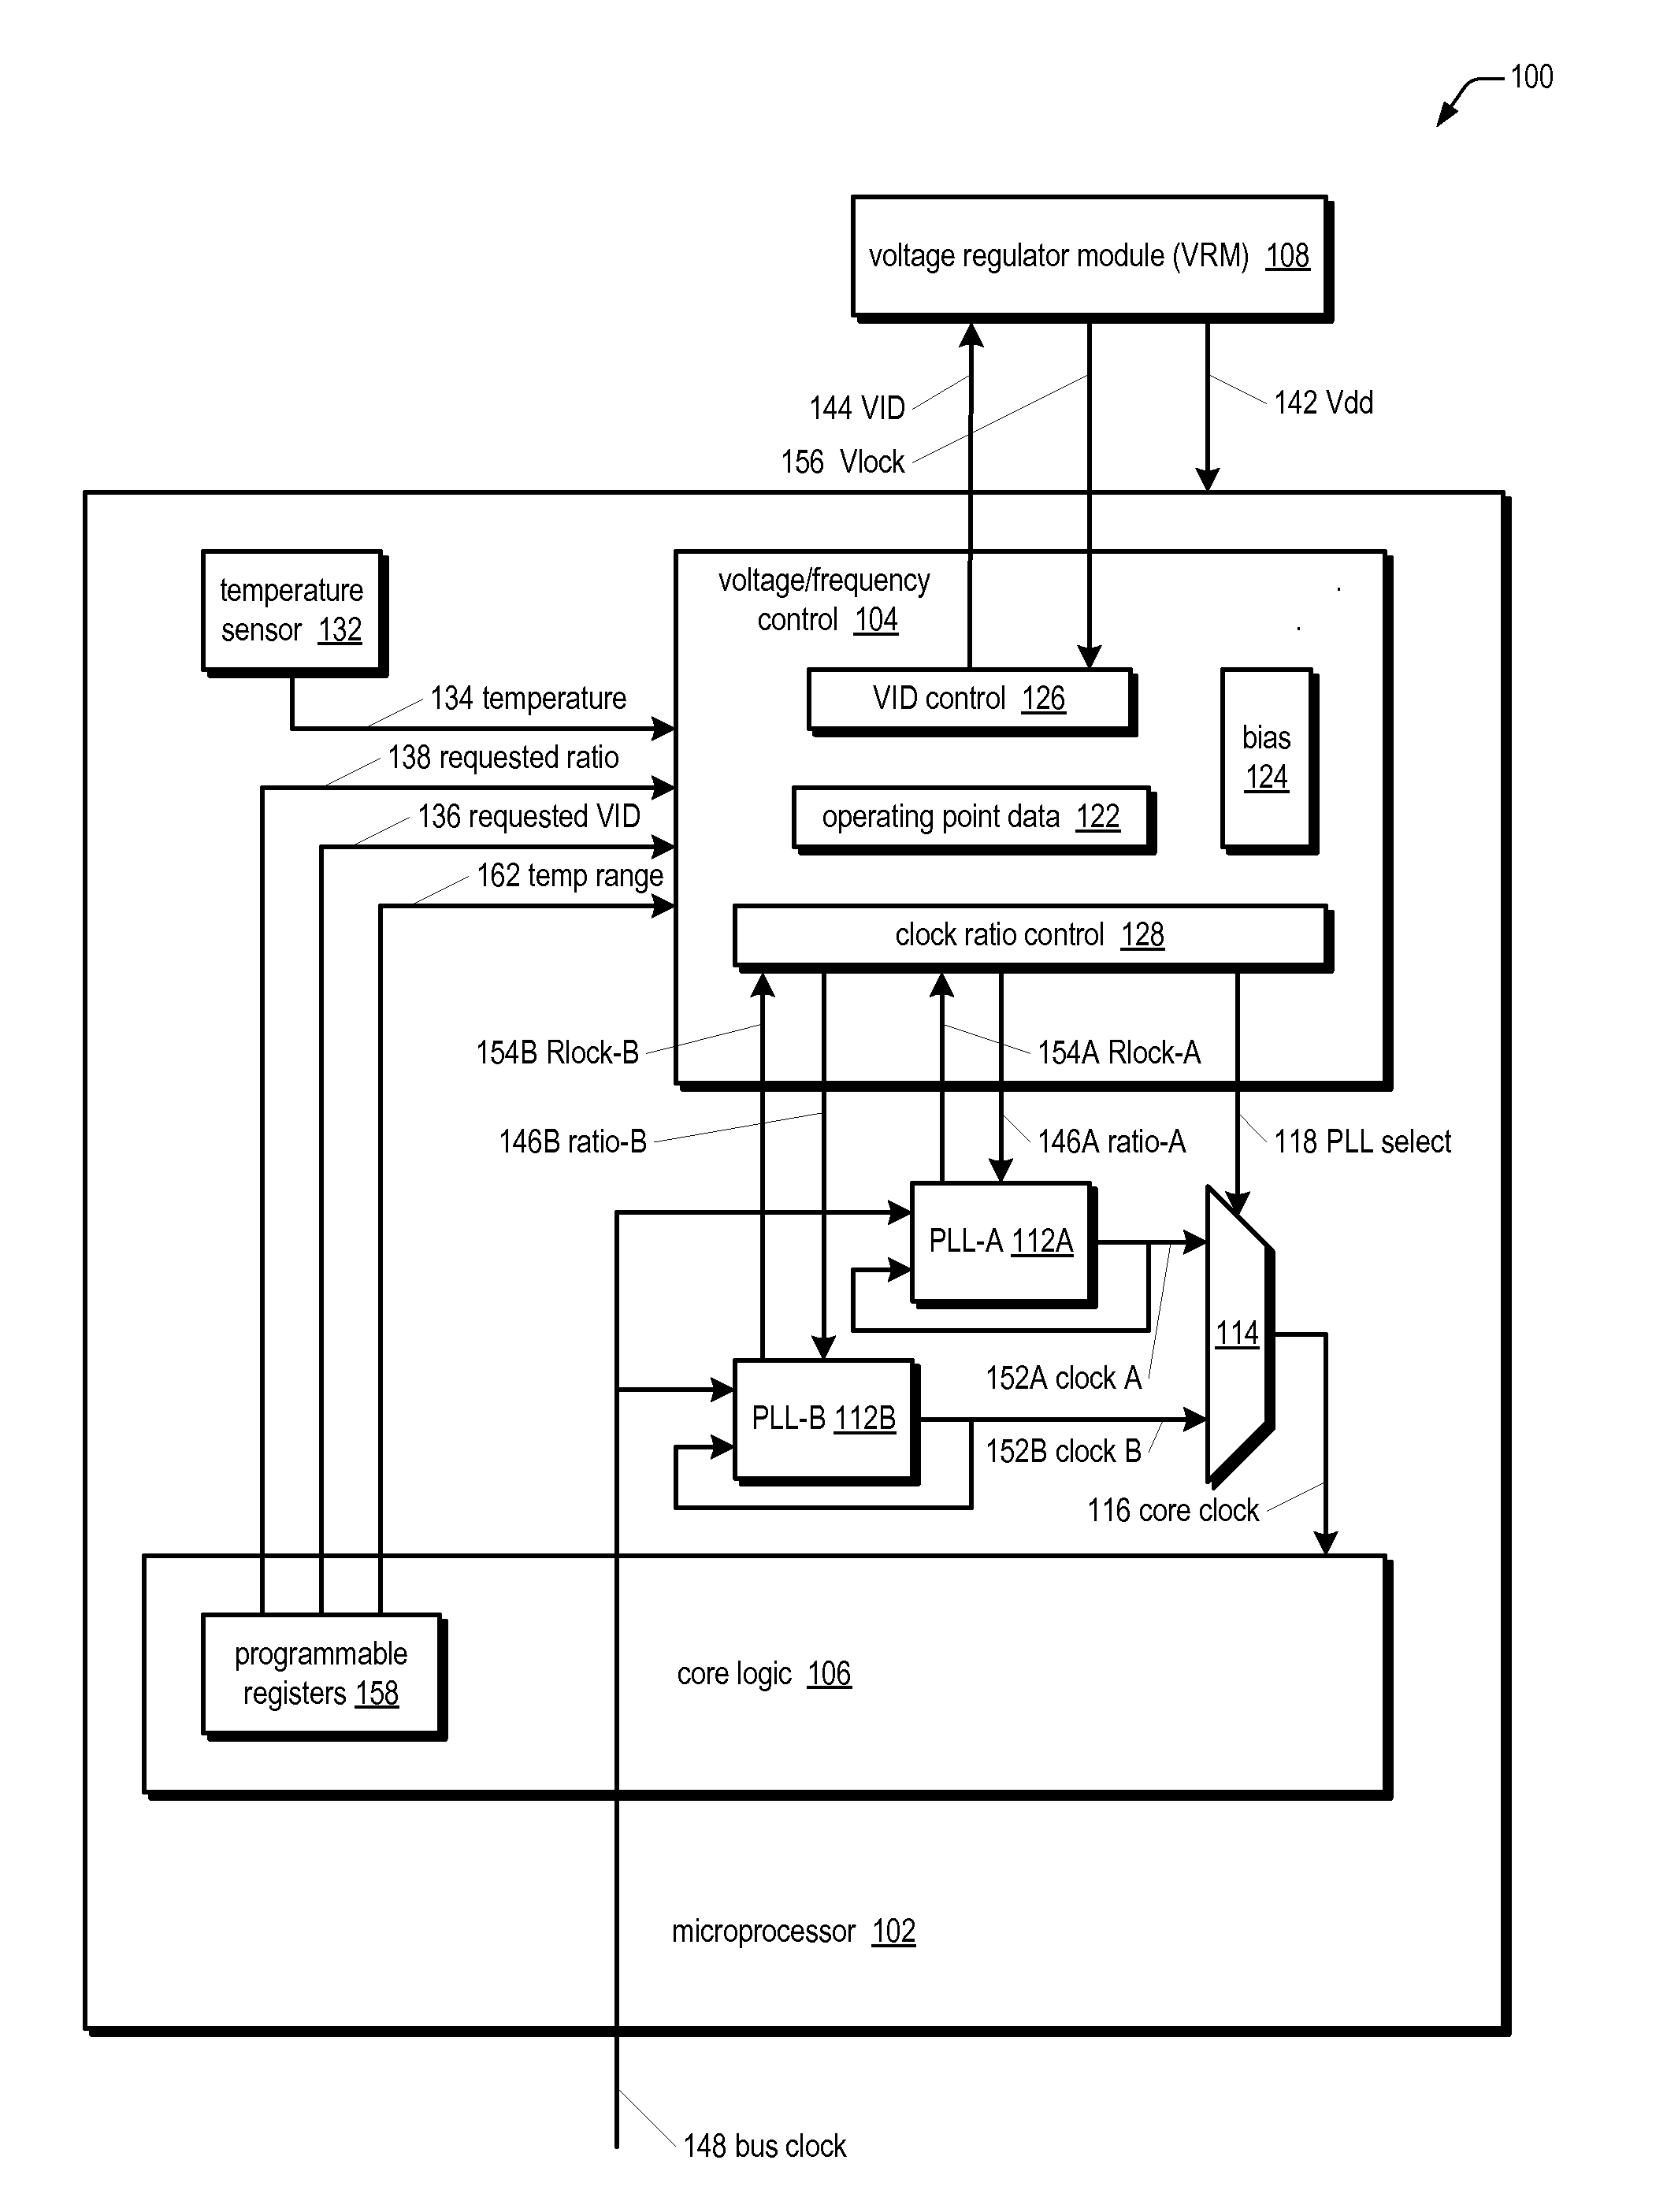 Microprocessor with improved thermal monitoring and protection mechanism